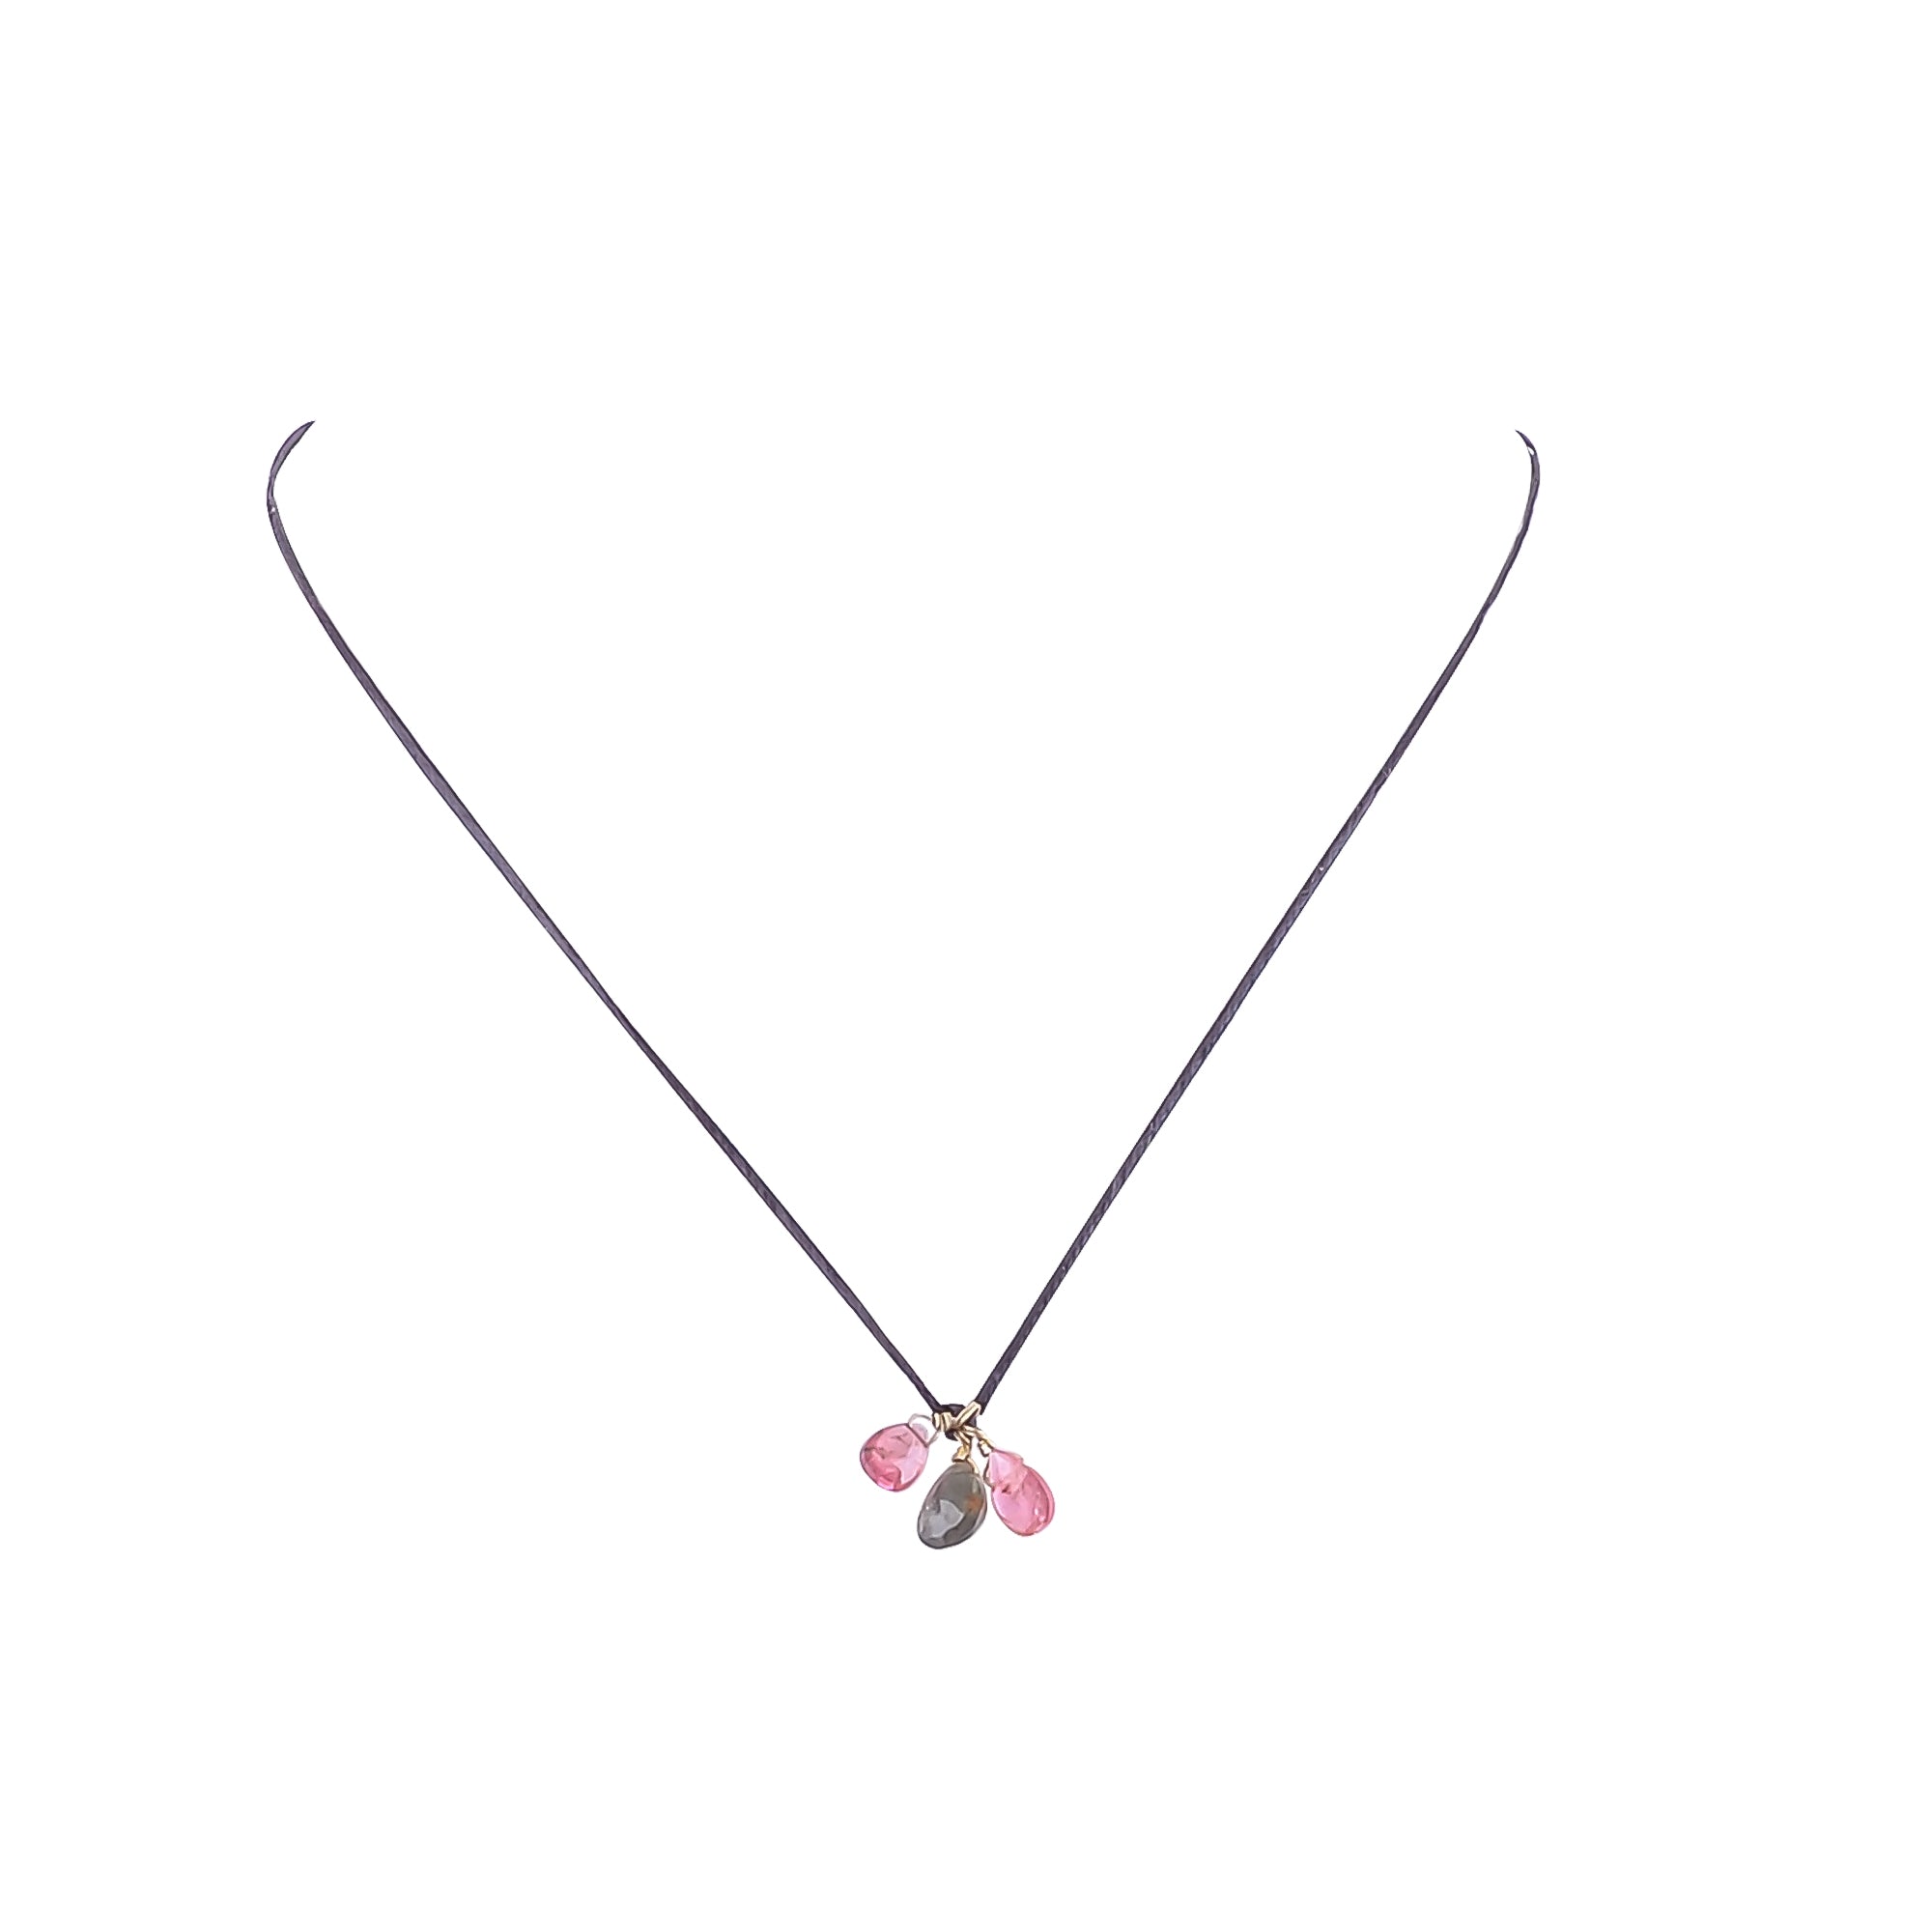 Buy Handmade Silver Gold Plated Tourmaline Thread Necklace